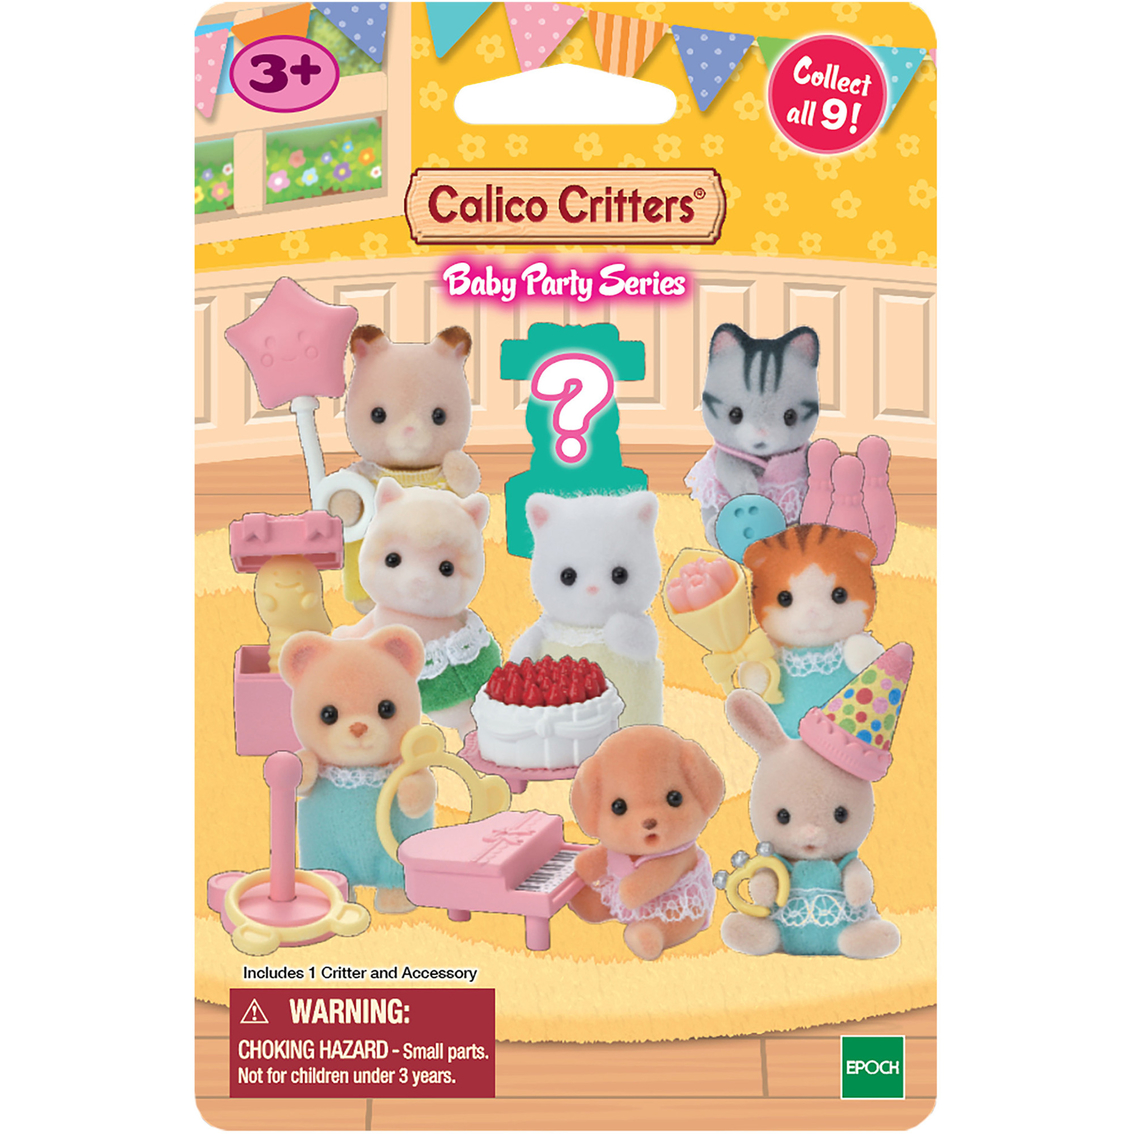 Epoch Calico Critters Baby Party Series Blind Bags, Dolls